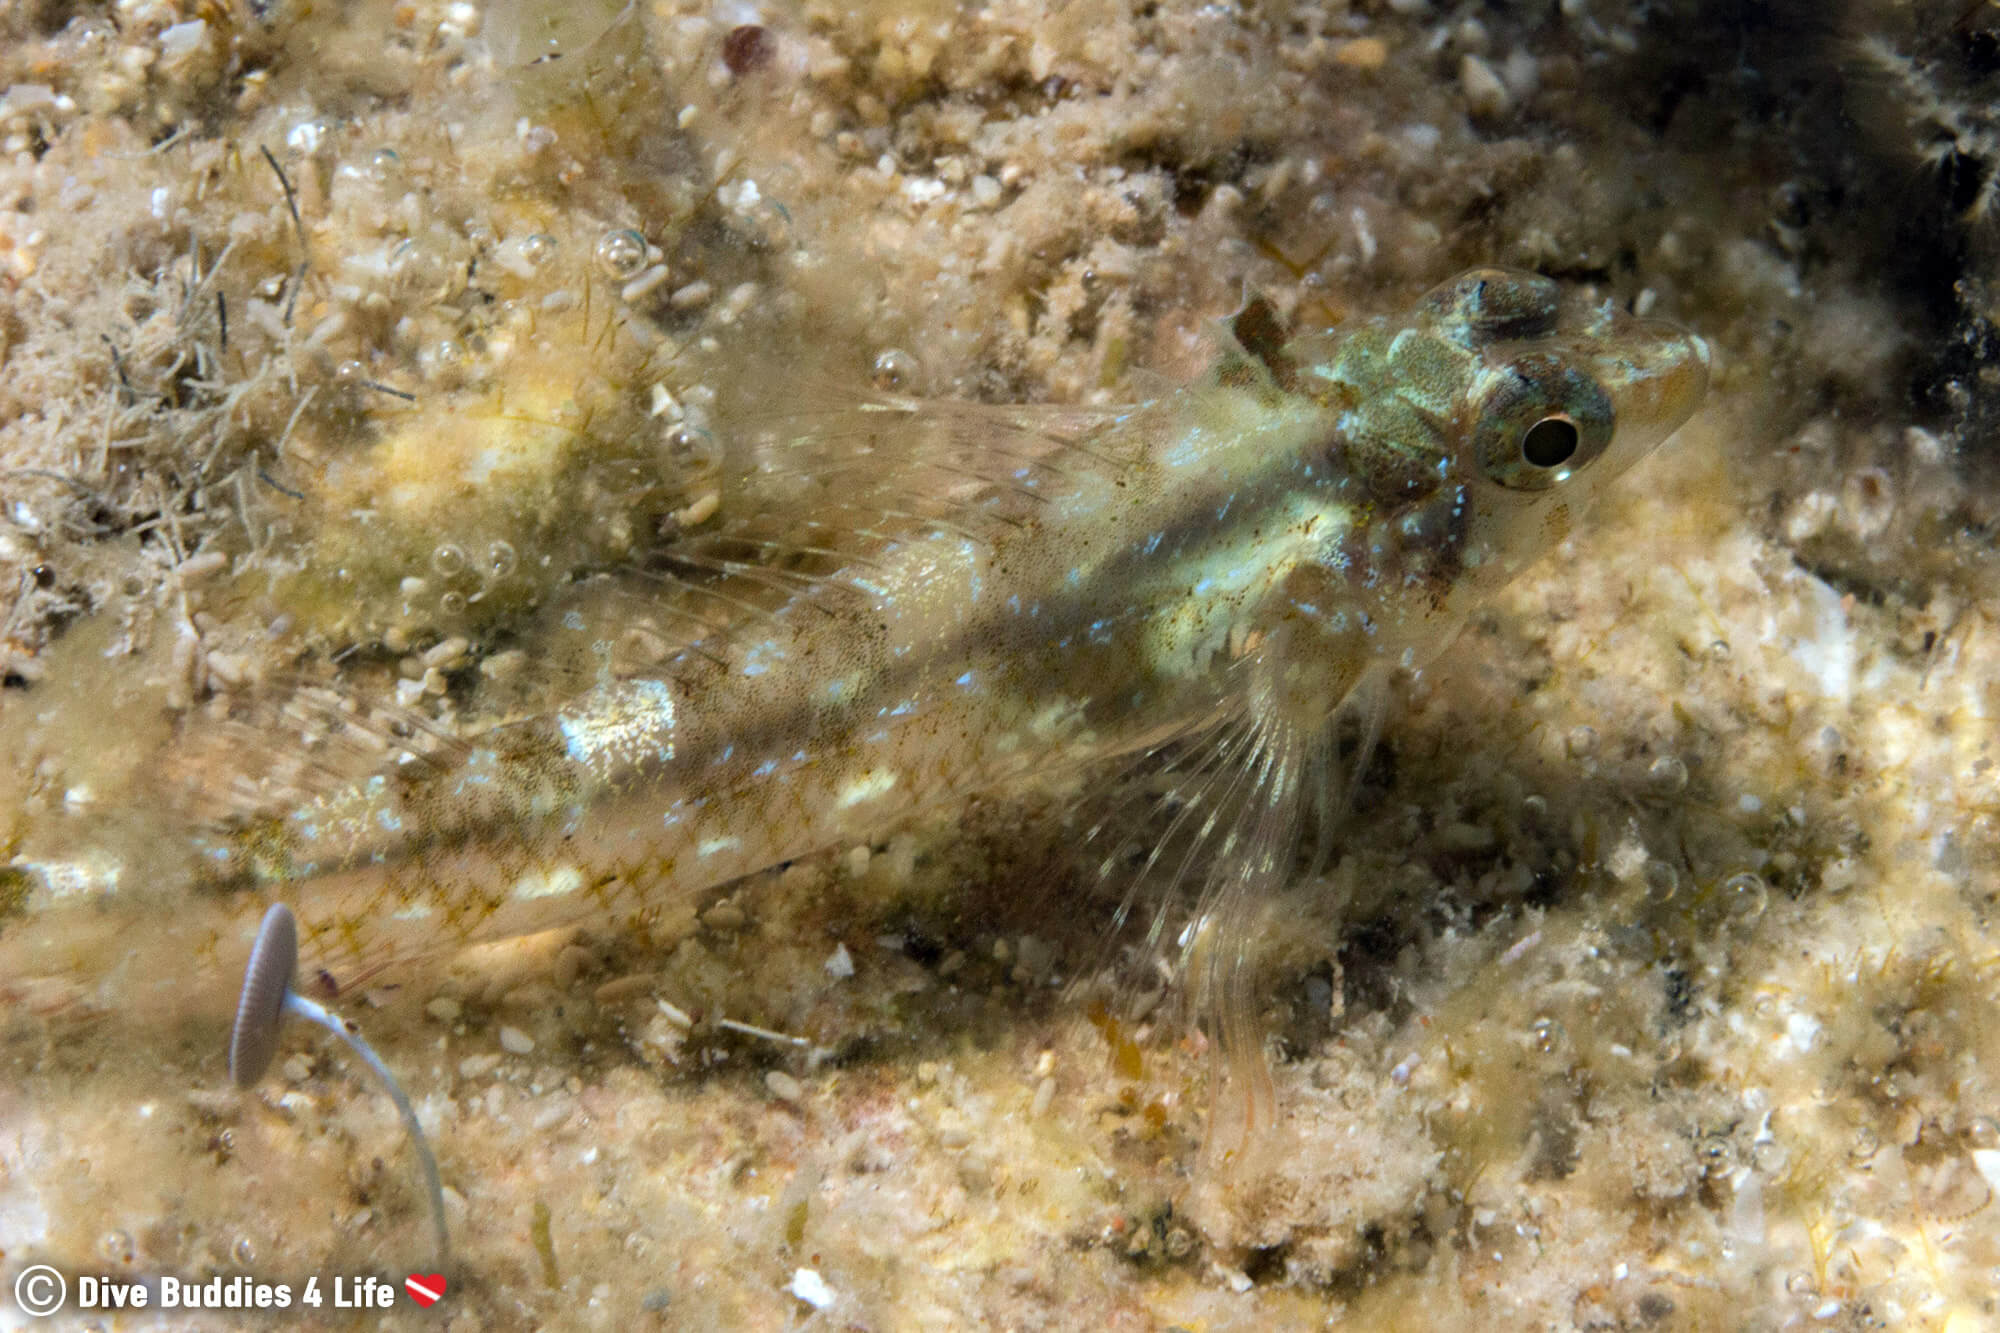 A Sandy Colored Fish Species, Seen While Scuba Diving In Sarandë, Albania, Europe